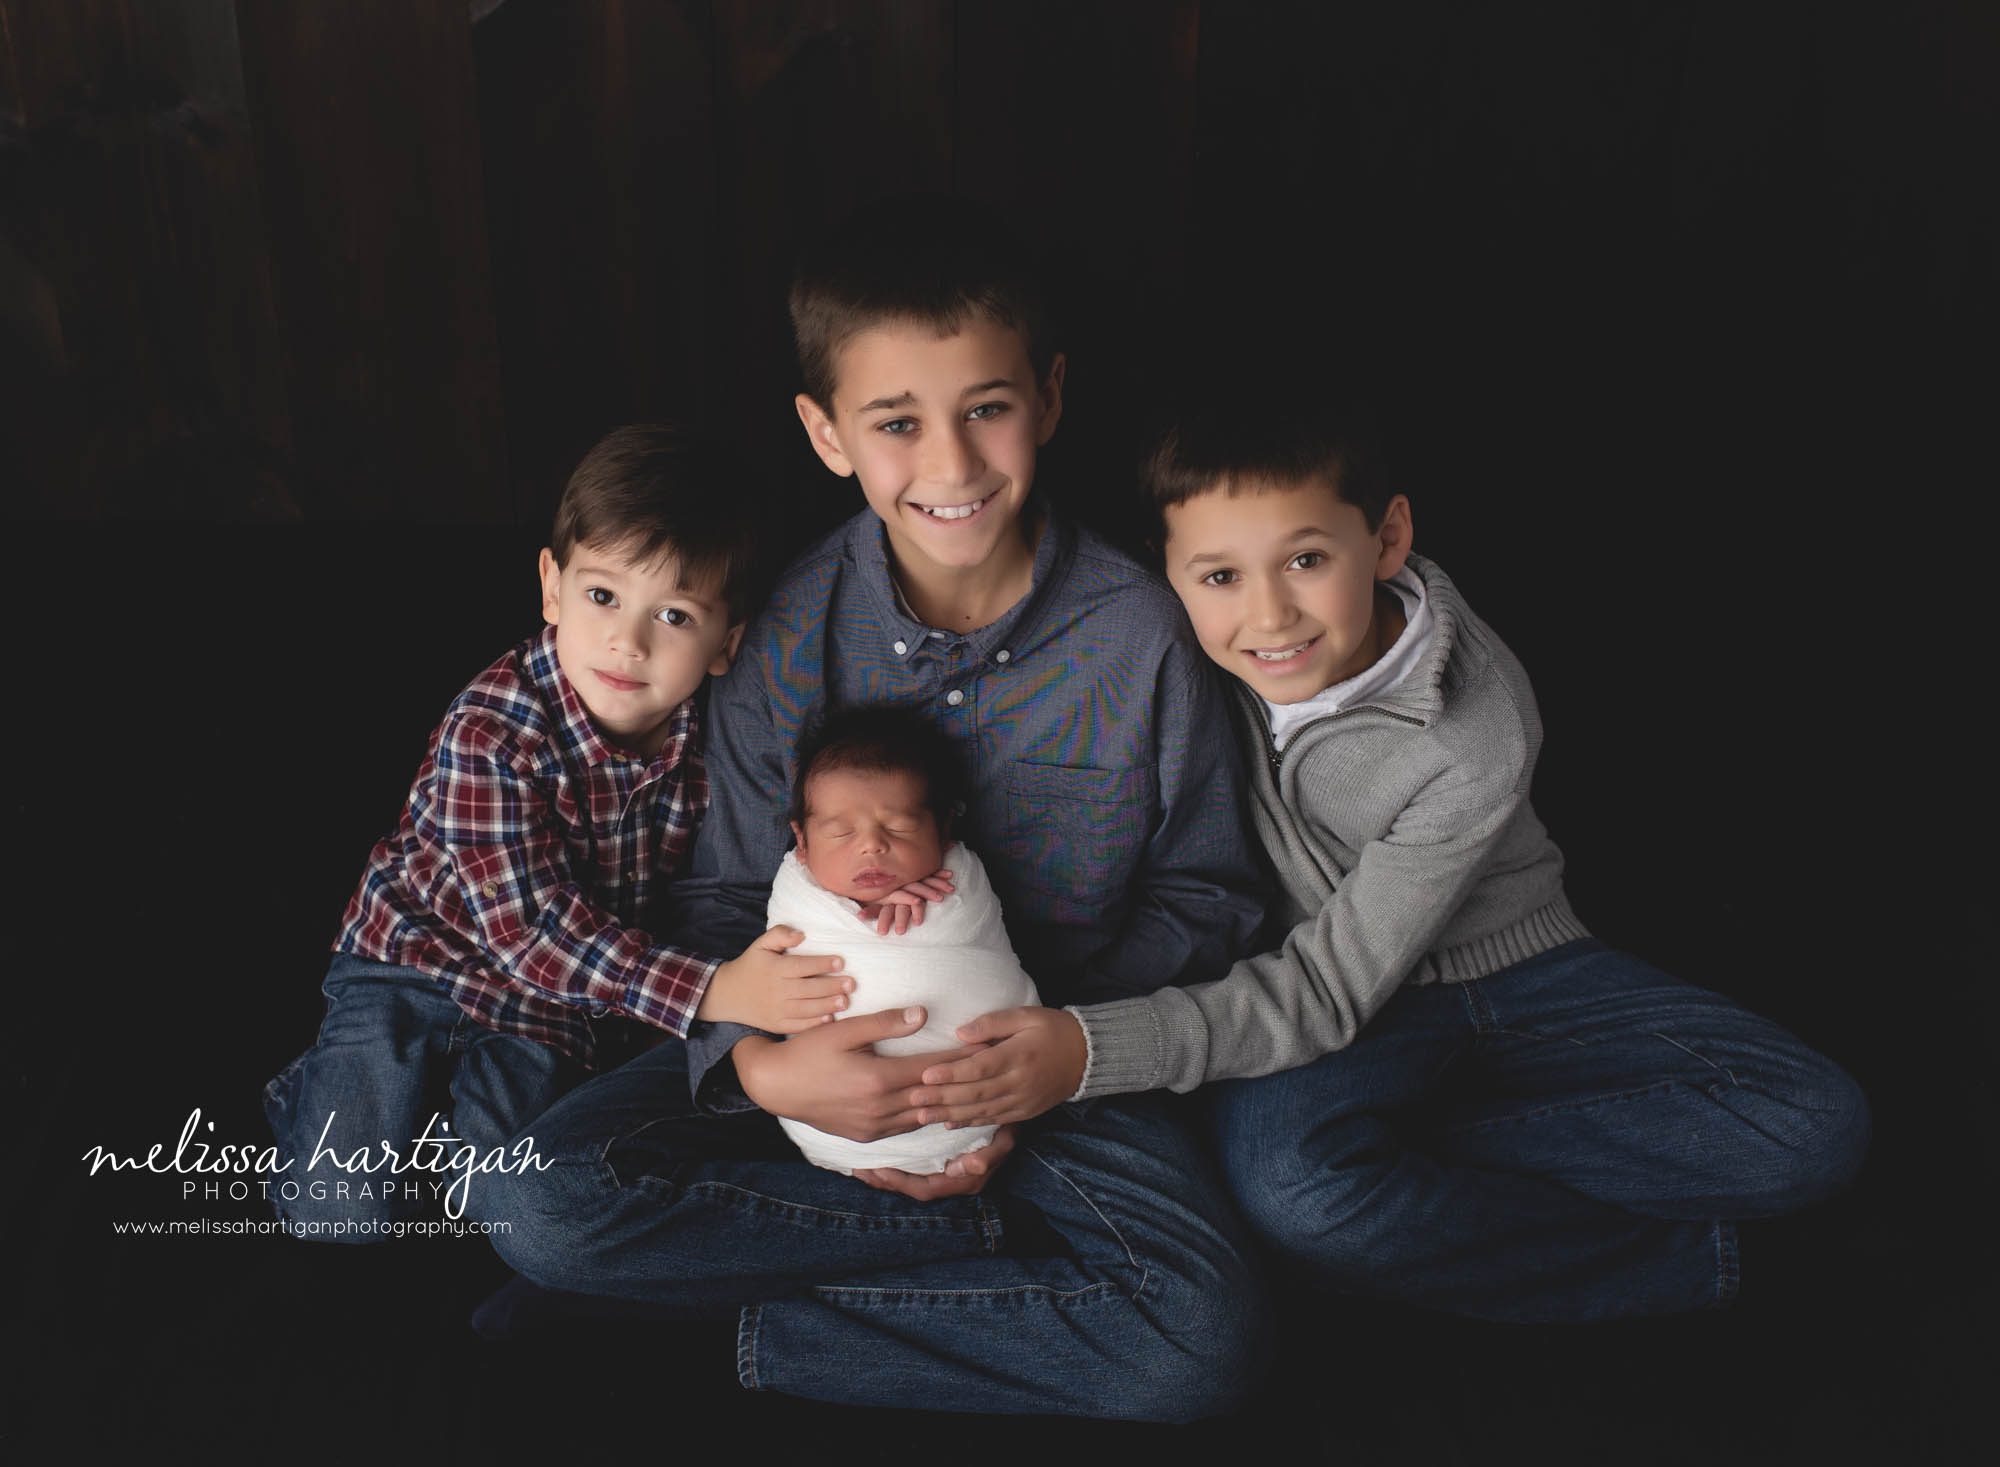 three older siblings holding their baby brother in studio family photography pose newborn session